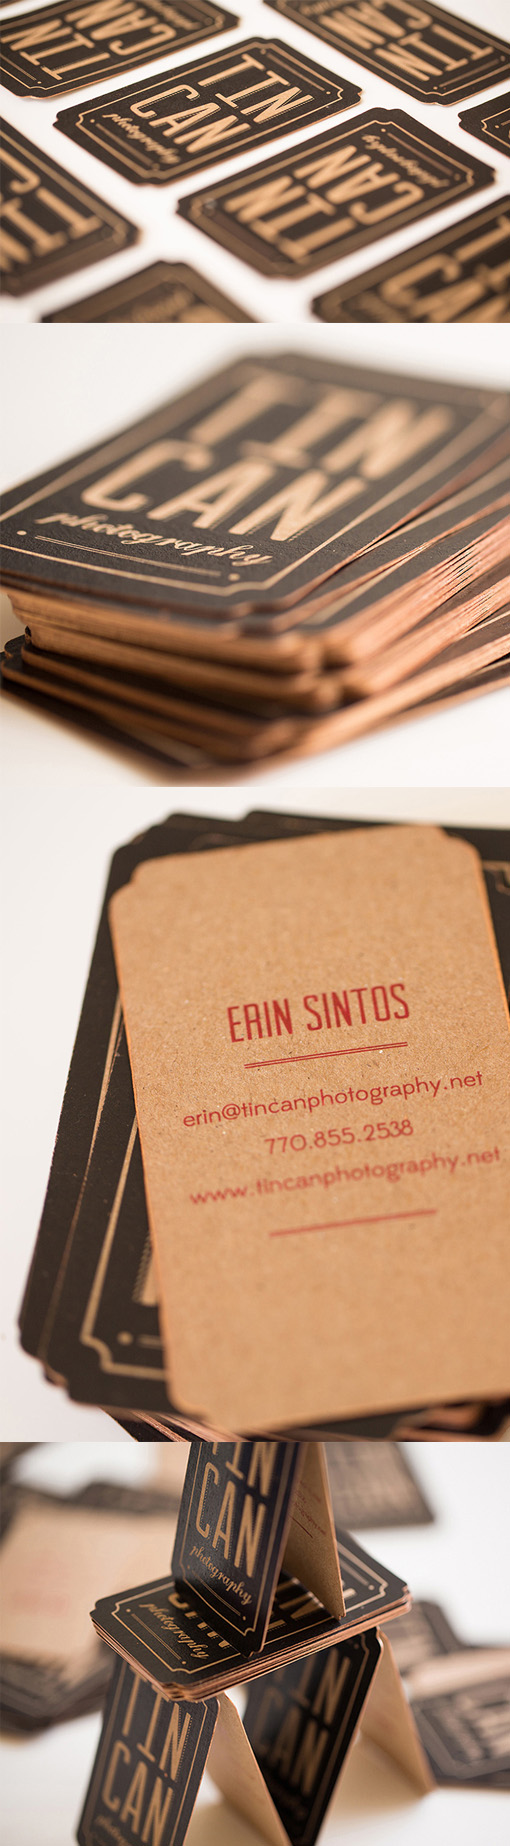 Quirky Vintage Style Gold Edged Business Card For A Photographer